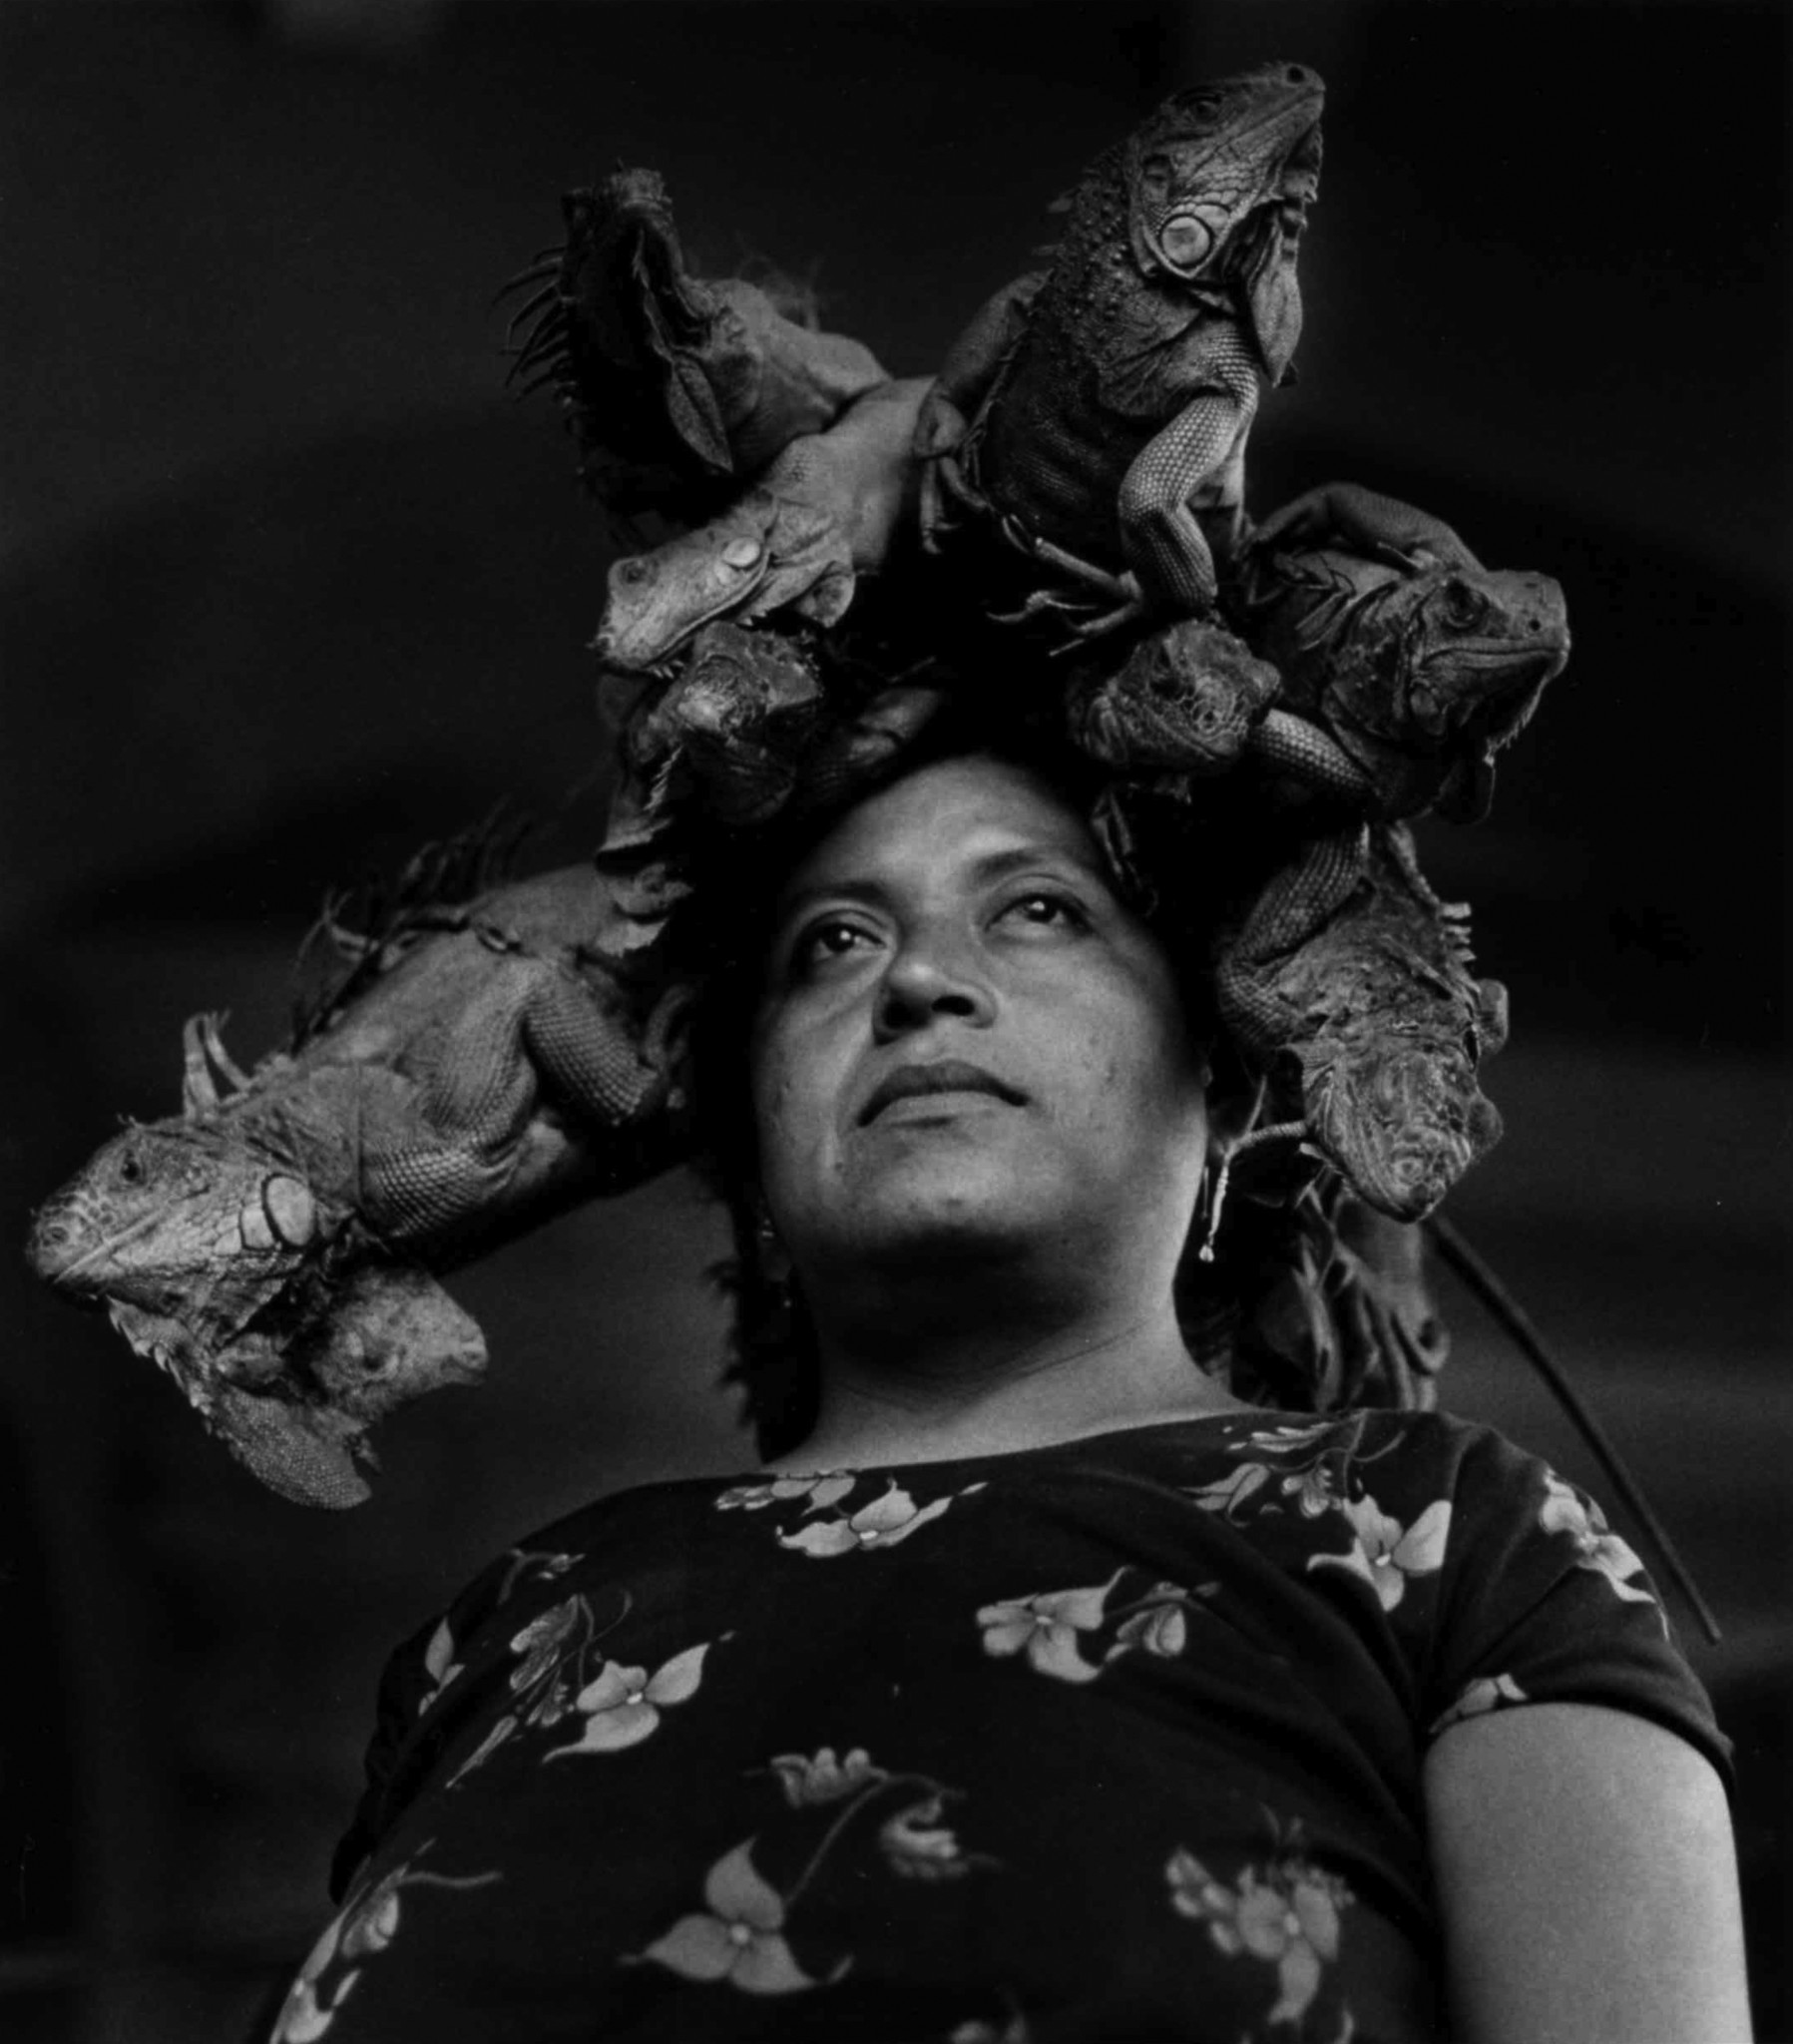 "Our Lady of the Iguanas, Juchitán, Mexico," 1979, is one of Graciela Iturbide's most iconic images.